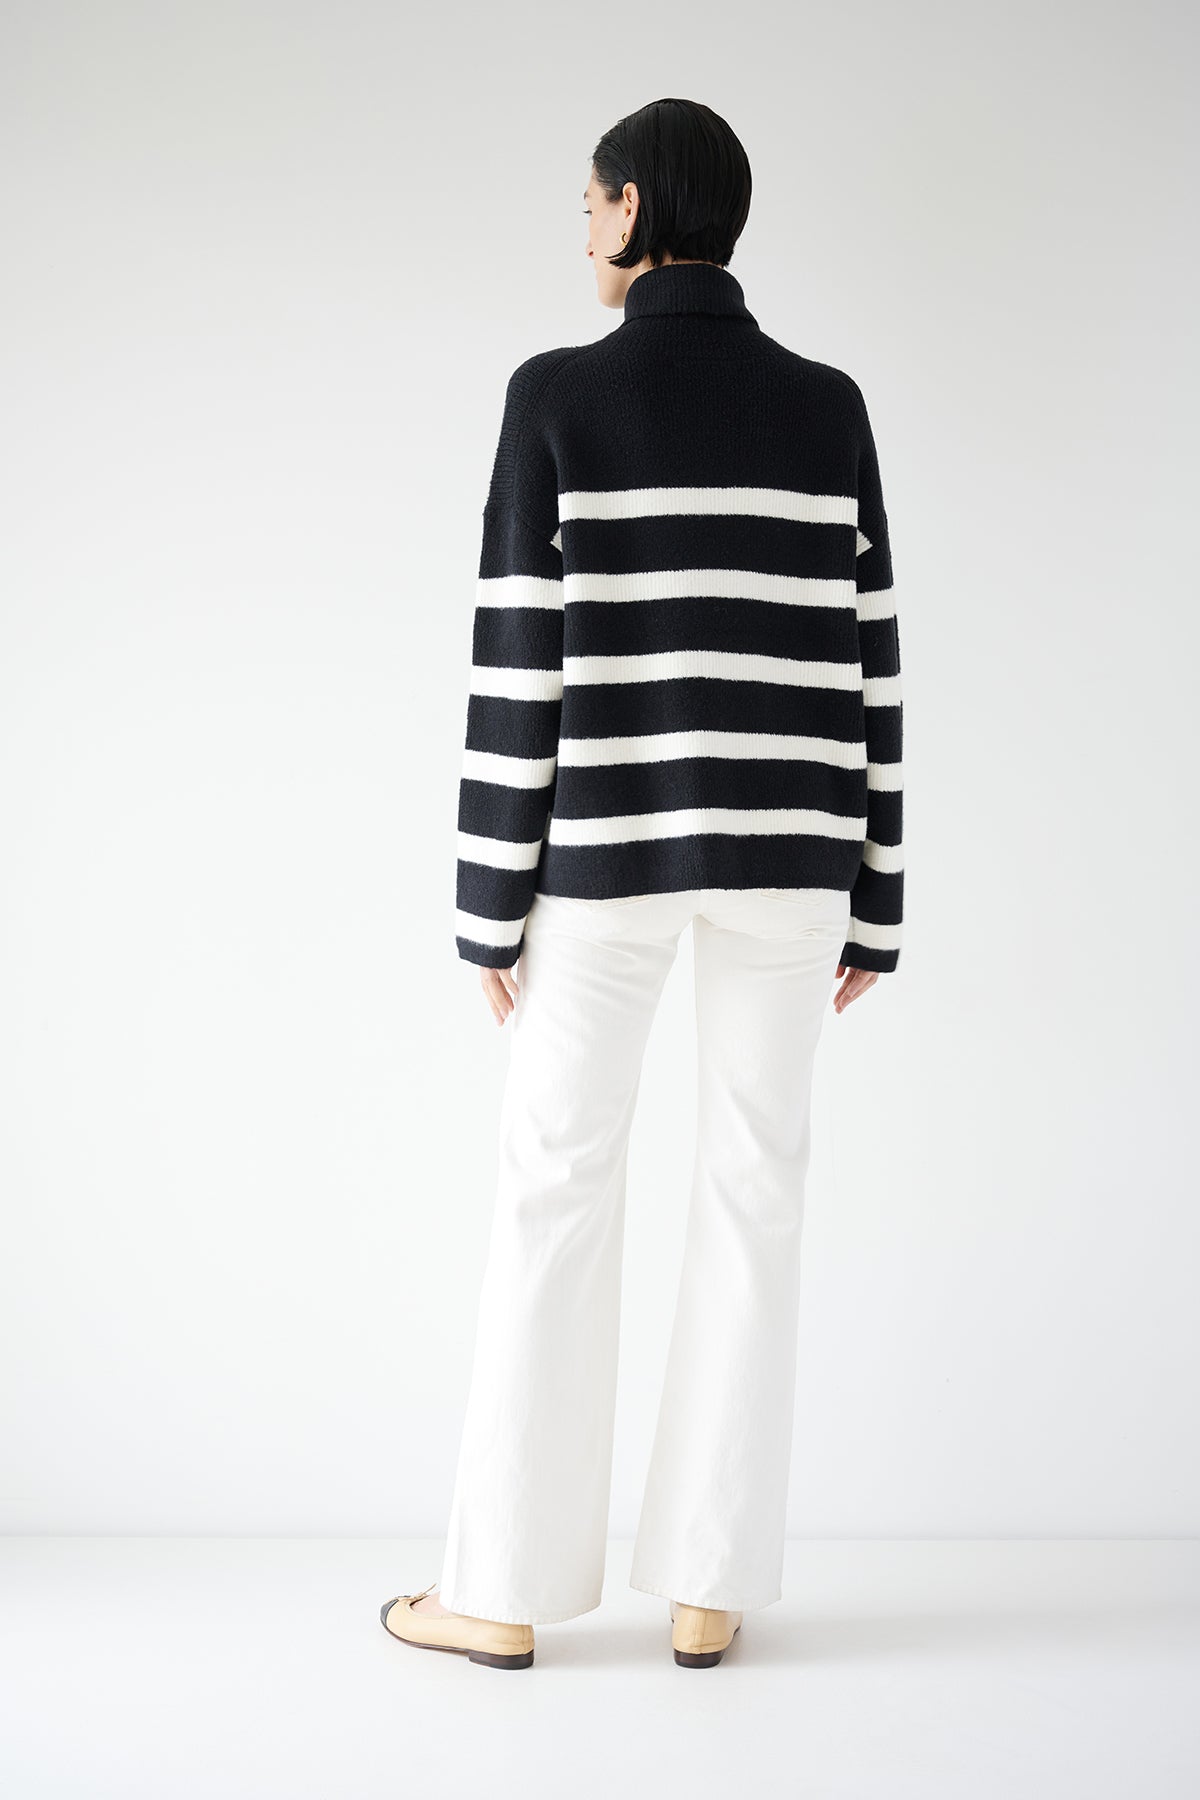   The back view of a woman wearing an oversized ENCINO SWEATER in a black and white striped pattern, by Velvet by Jenny Graham. 